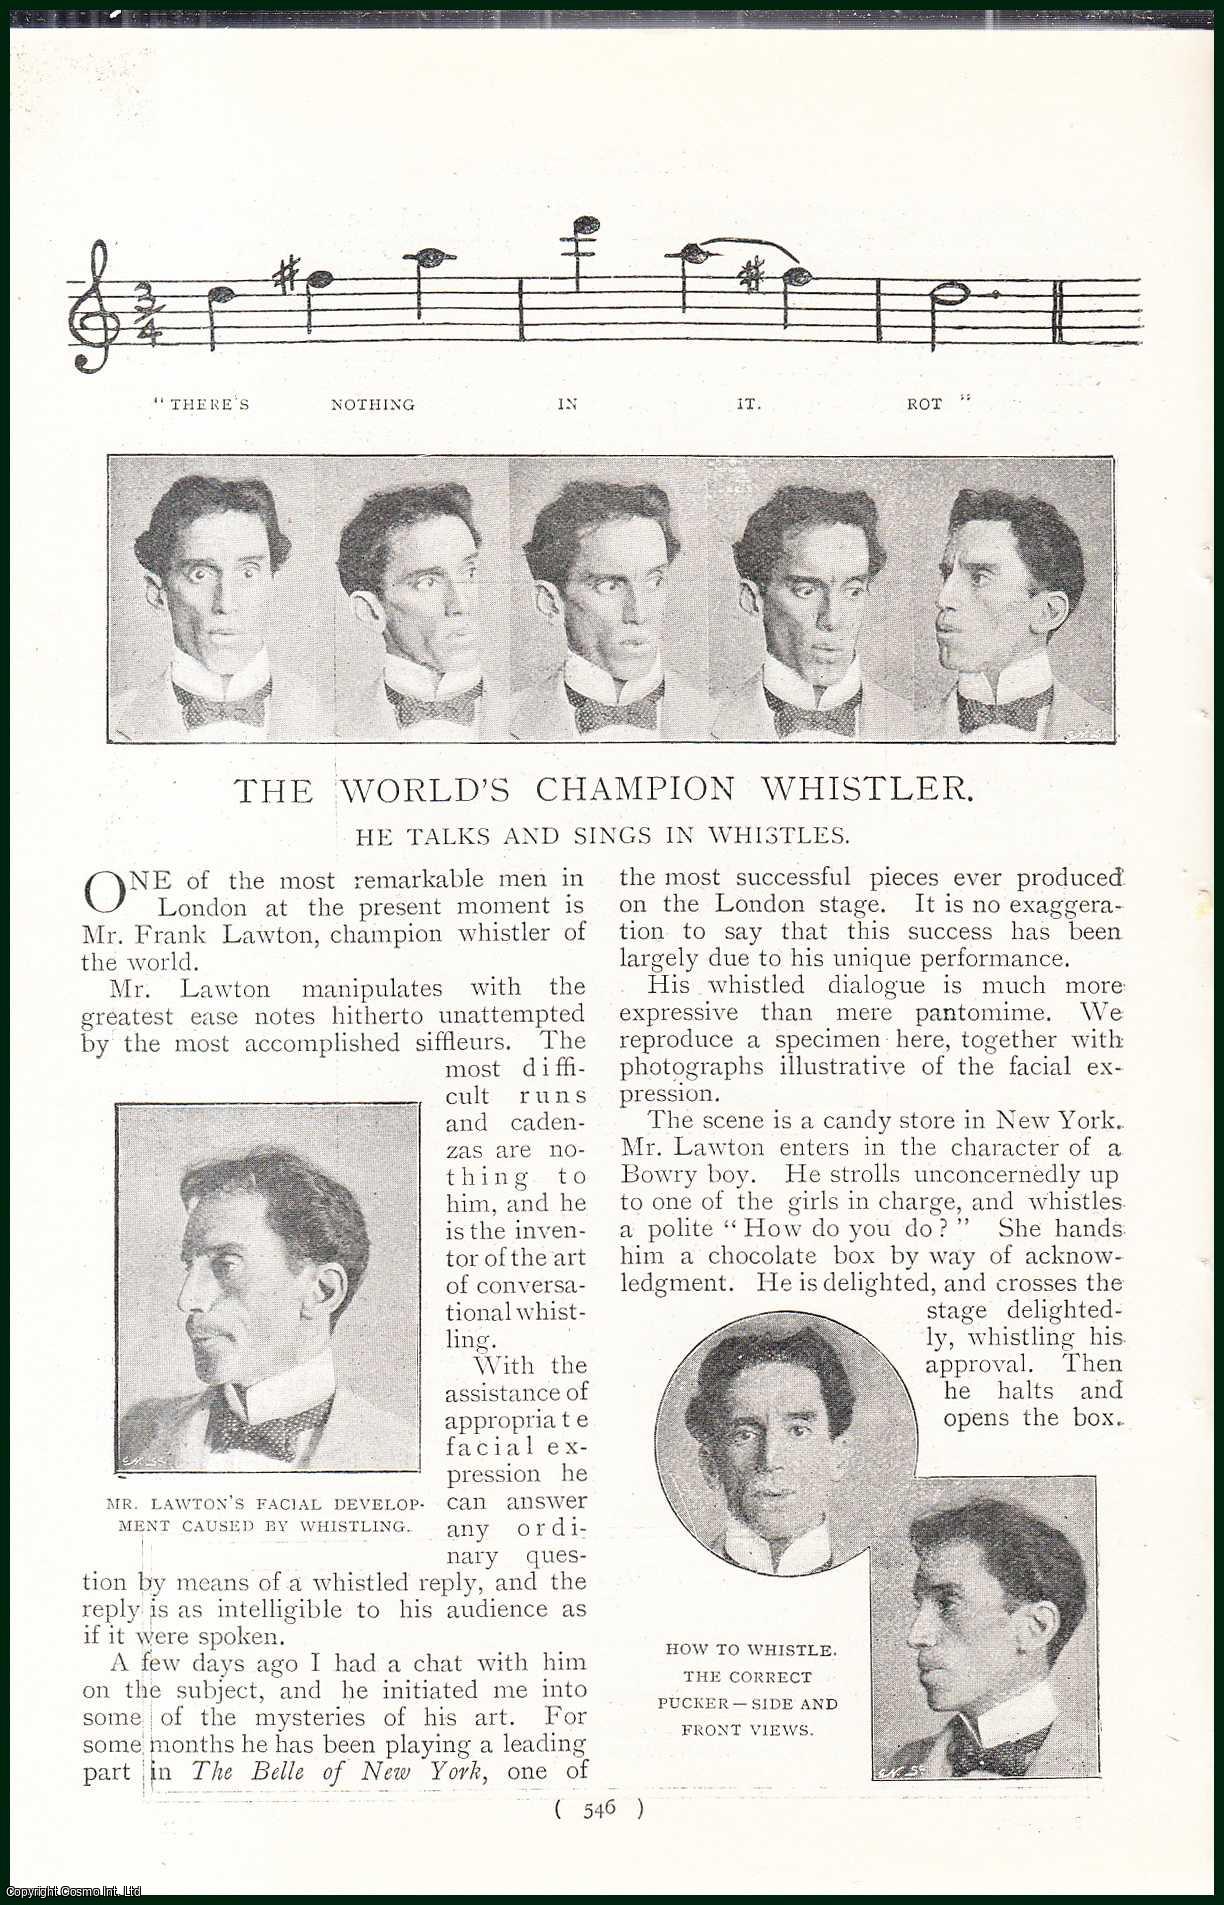 No Author Stated - Mr. Frank Lawton, The World's Champion Whistler: He Talks & Sings in Whistles. An uncommon original article from the Harmsworth London Magazine, 1898.